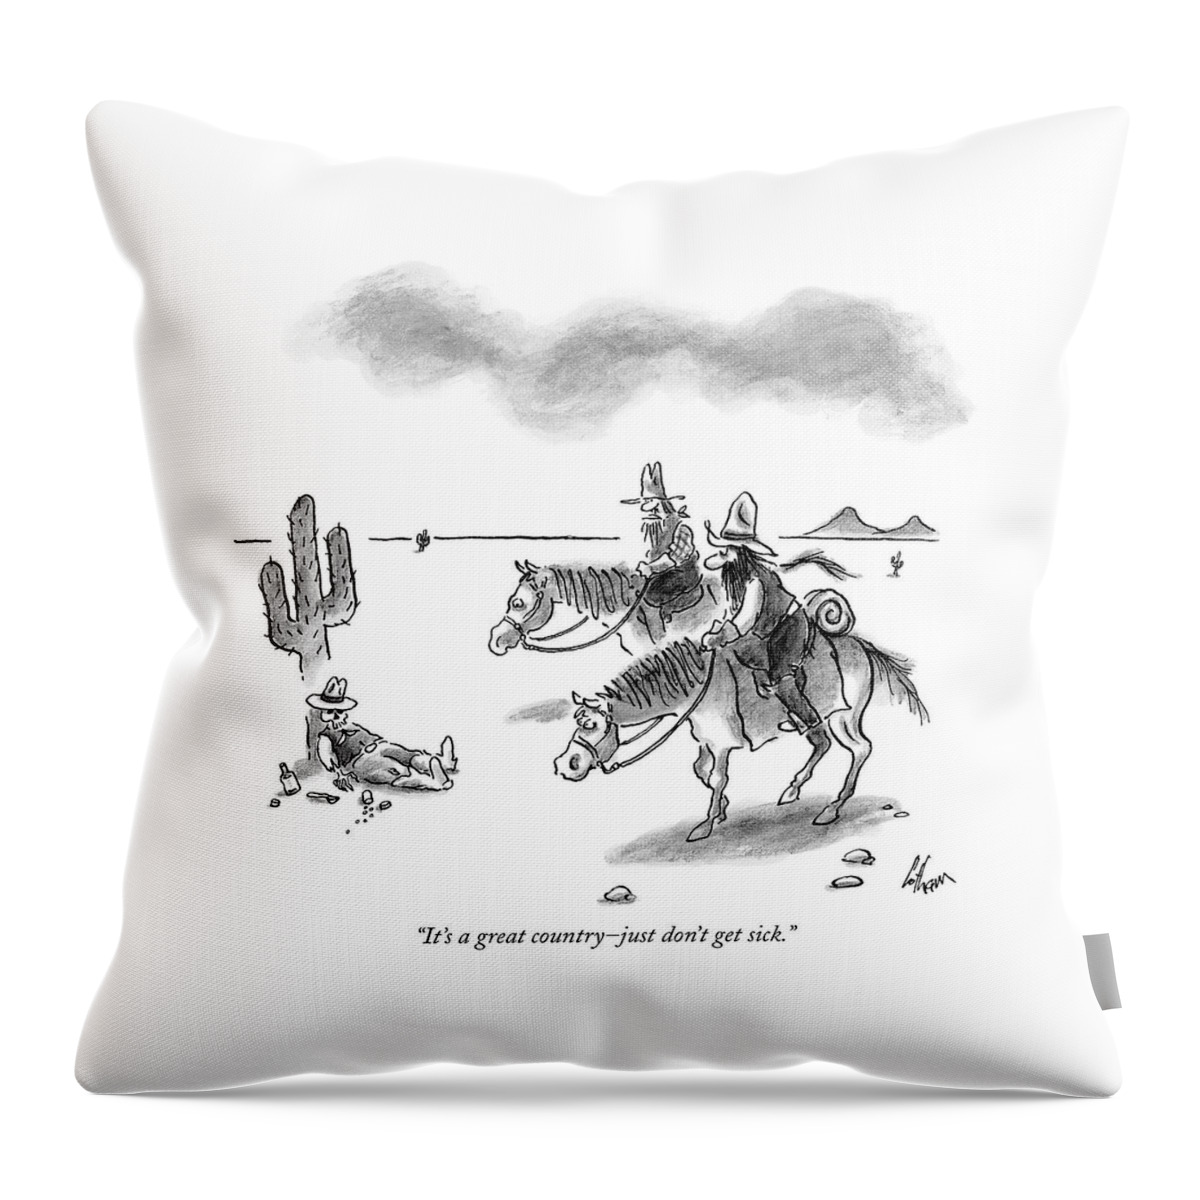 It's A Great Country - Just Don't Get Sick Throw Pillow